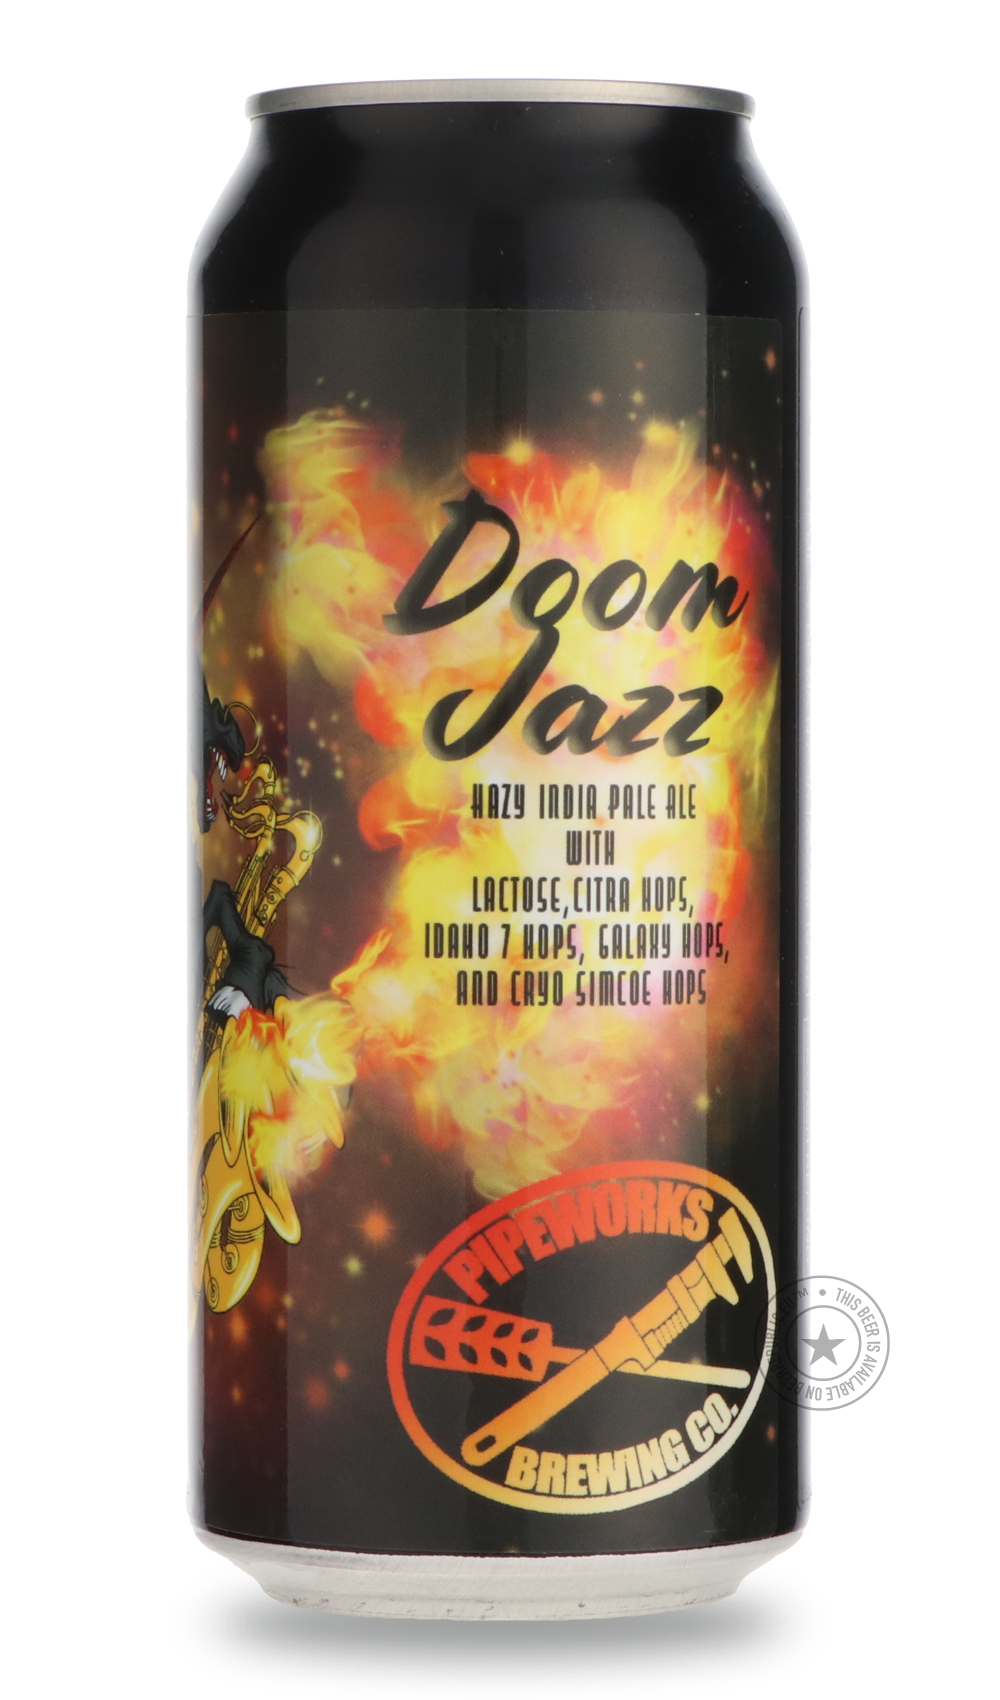 -Pipeworks- Doom Jazz-IPA- Only @ Beer Republic - The best online beer store for American & Canadian craft beer - Buy beer online from the USA and Canada - Bier online kopen - Amerikaans bier kopen - Craft beer store - Craft beer kopen - Amerikanisch bier kaufen - Bier online kaufen - Acheter biere online - IPA - Stout - Porter - New England IPA - Hazy IPA - Imperial Stout - Barrel Aged - Barrel Aged Imperial Stout - Brown - Dark beer - Blond - Blonde - Pilsner - Lager - Wheat - Weizen - Amber - Barley Wine